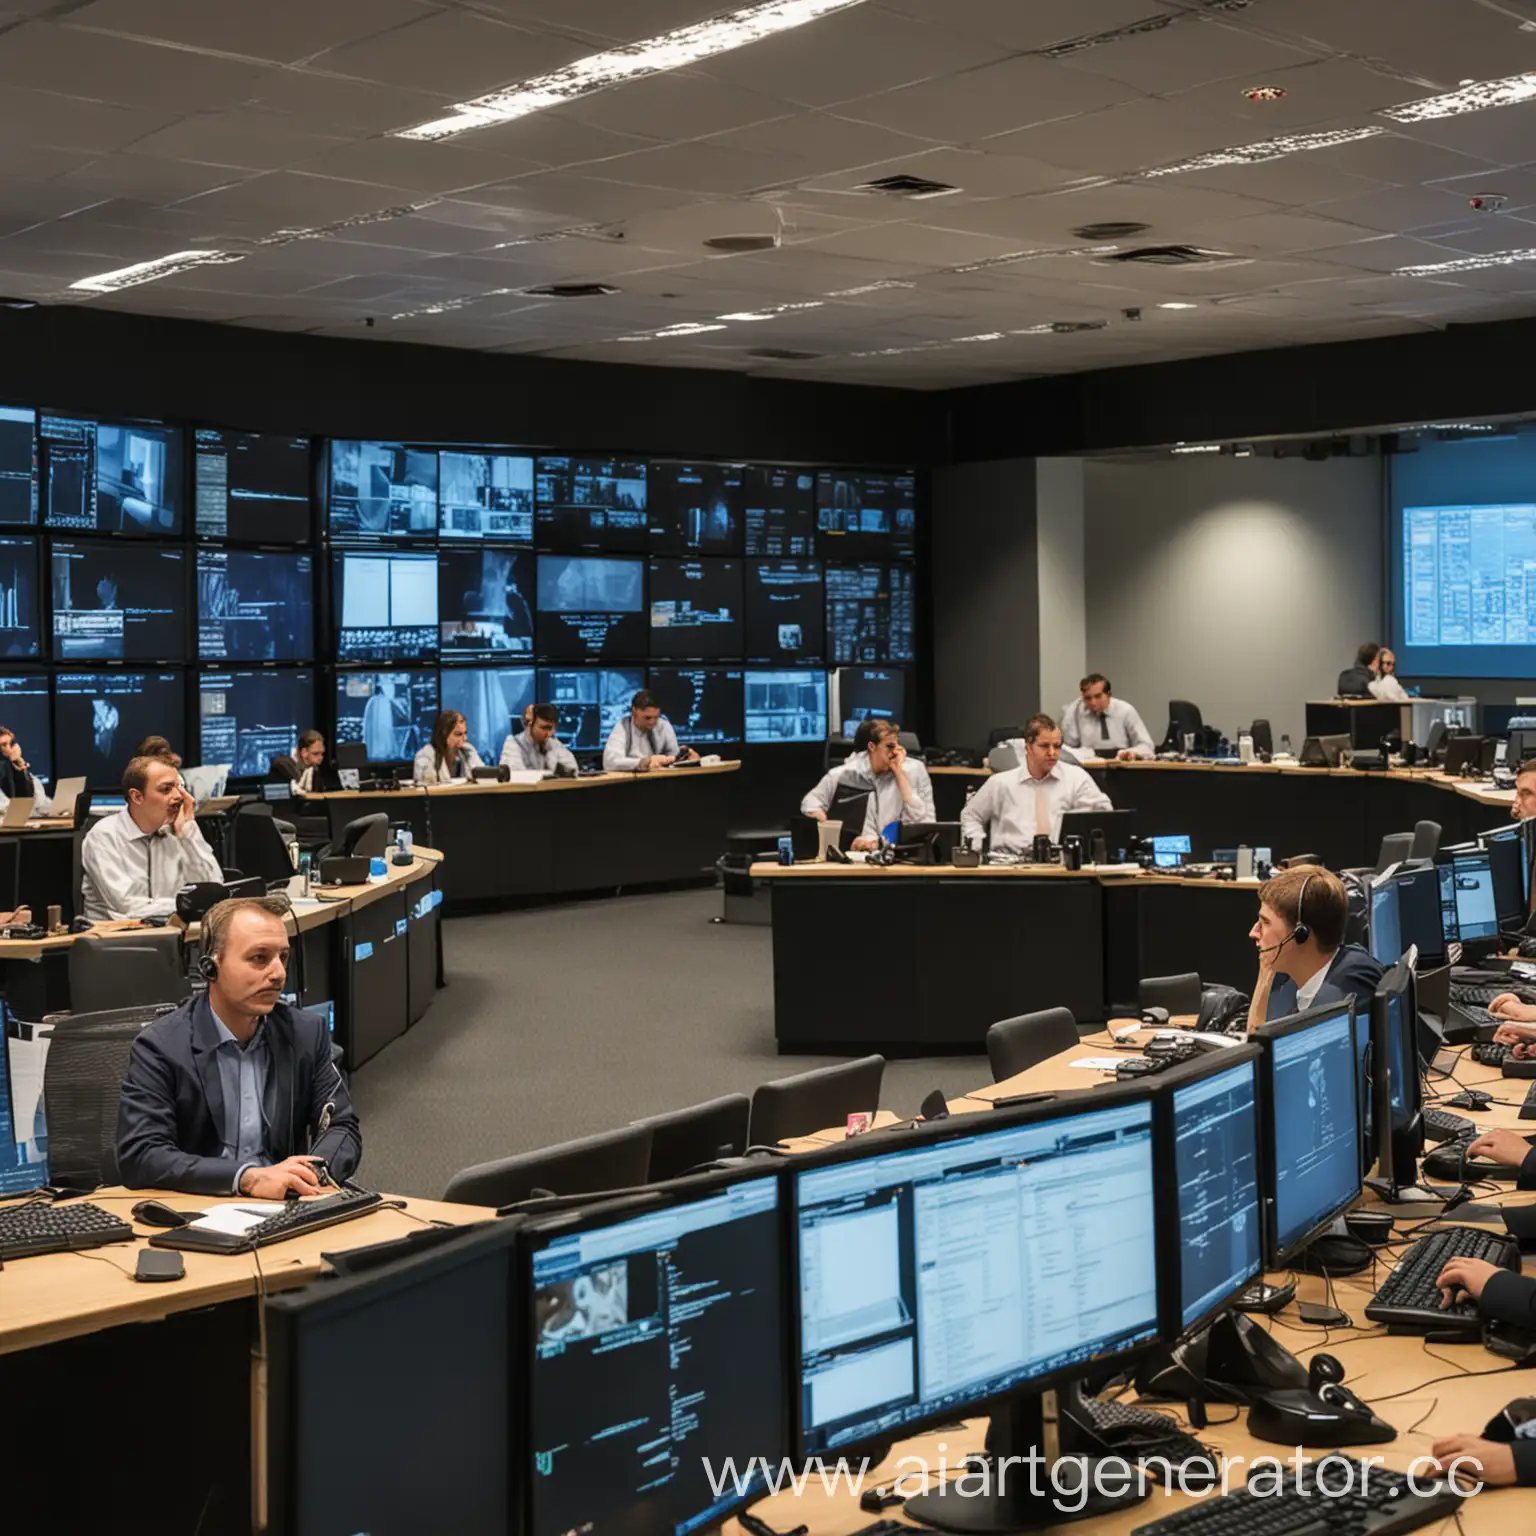 Working analysts in the Security operational Center sitting in a single row no more five people